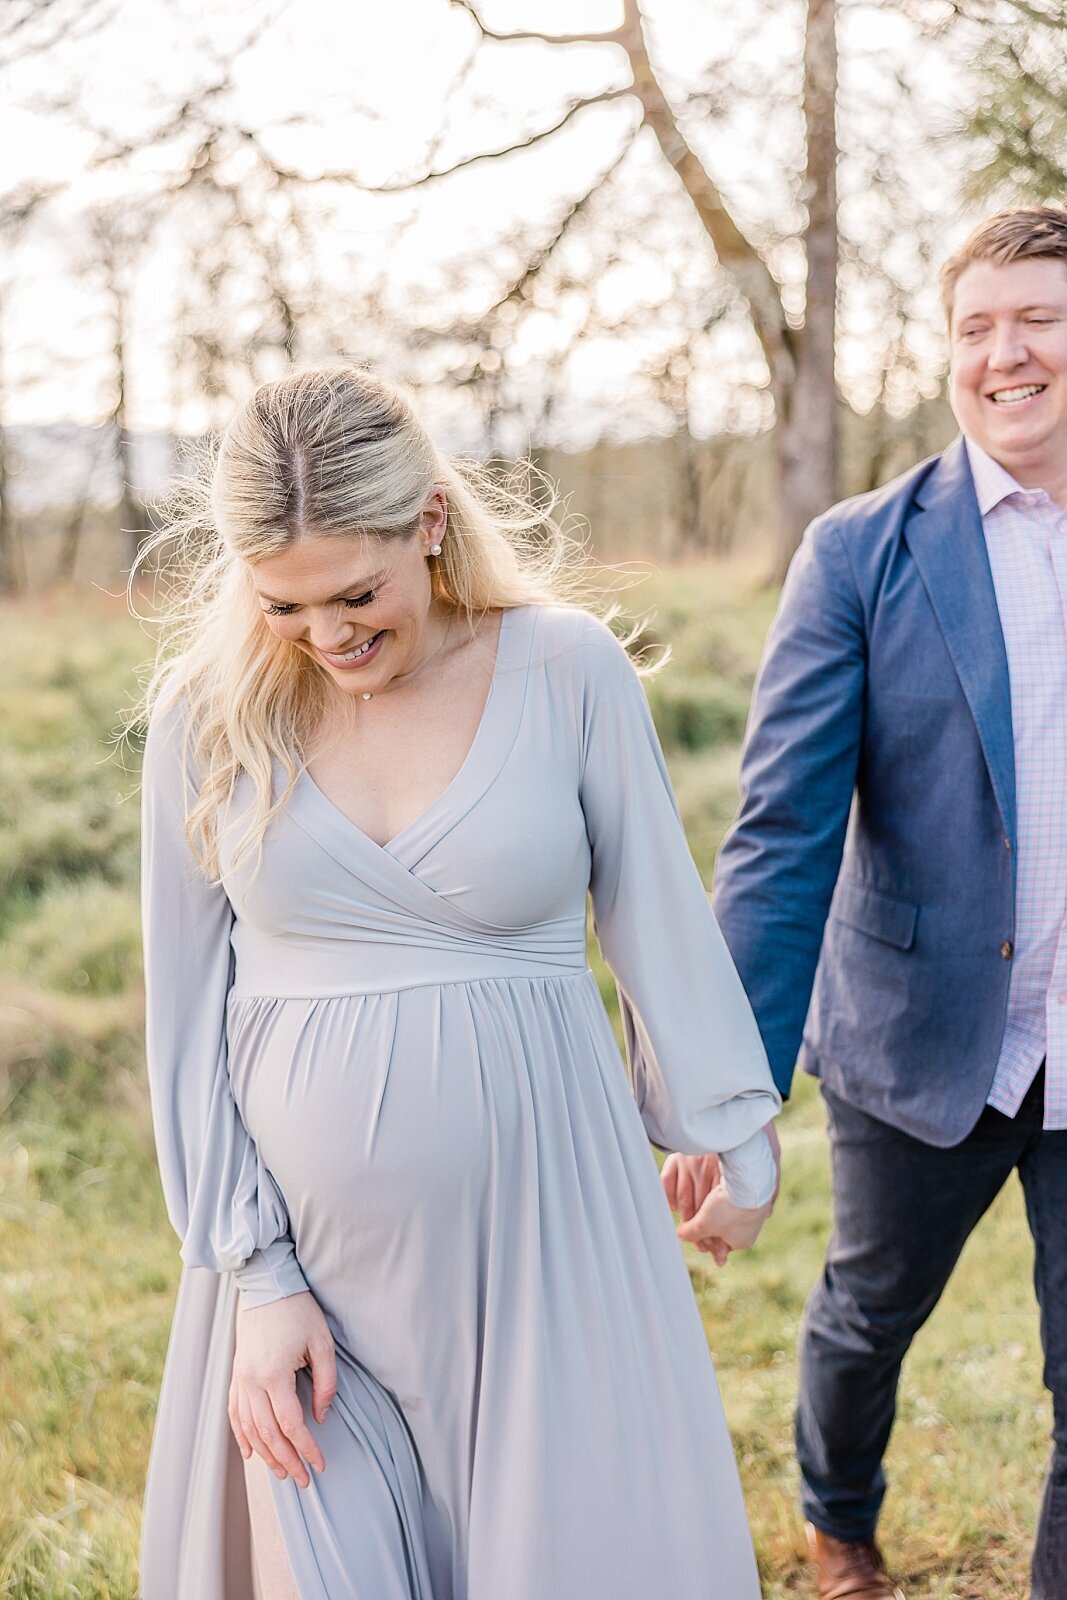 Pregnant mom laughing holding husband's hand in maternity photo session